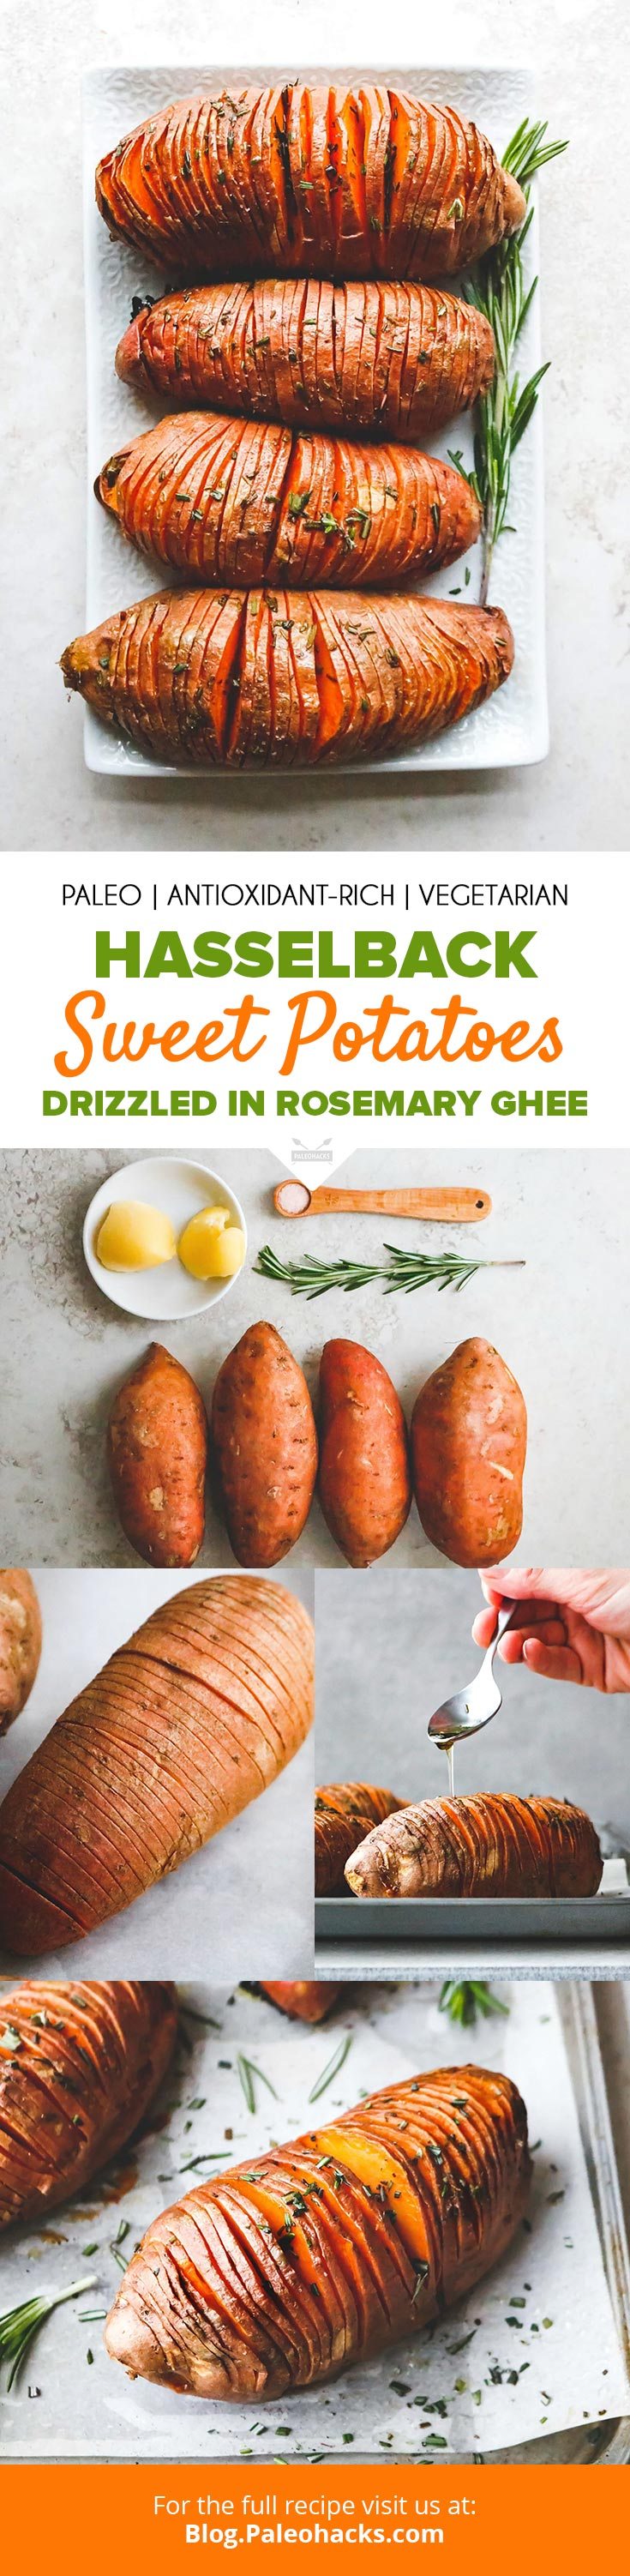 Move over baked potatoes! These Hasselback Sweet Potatoes are thinly sliced and baked to crisp perfection with antioxidant-rich ghee and fresh herbs.